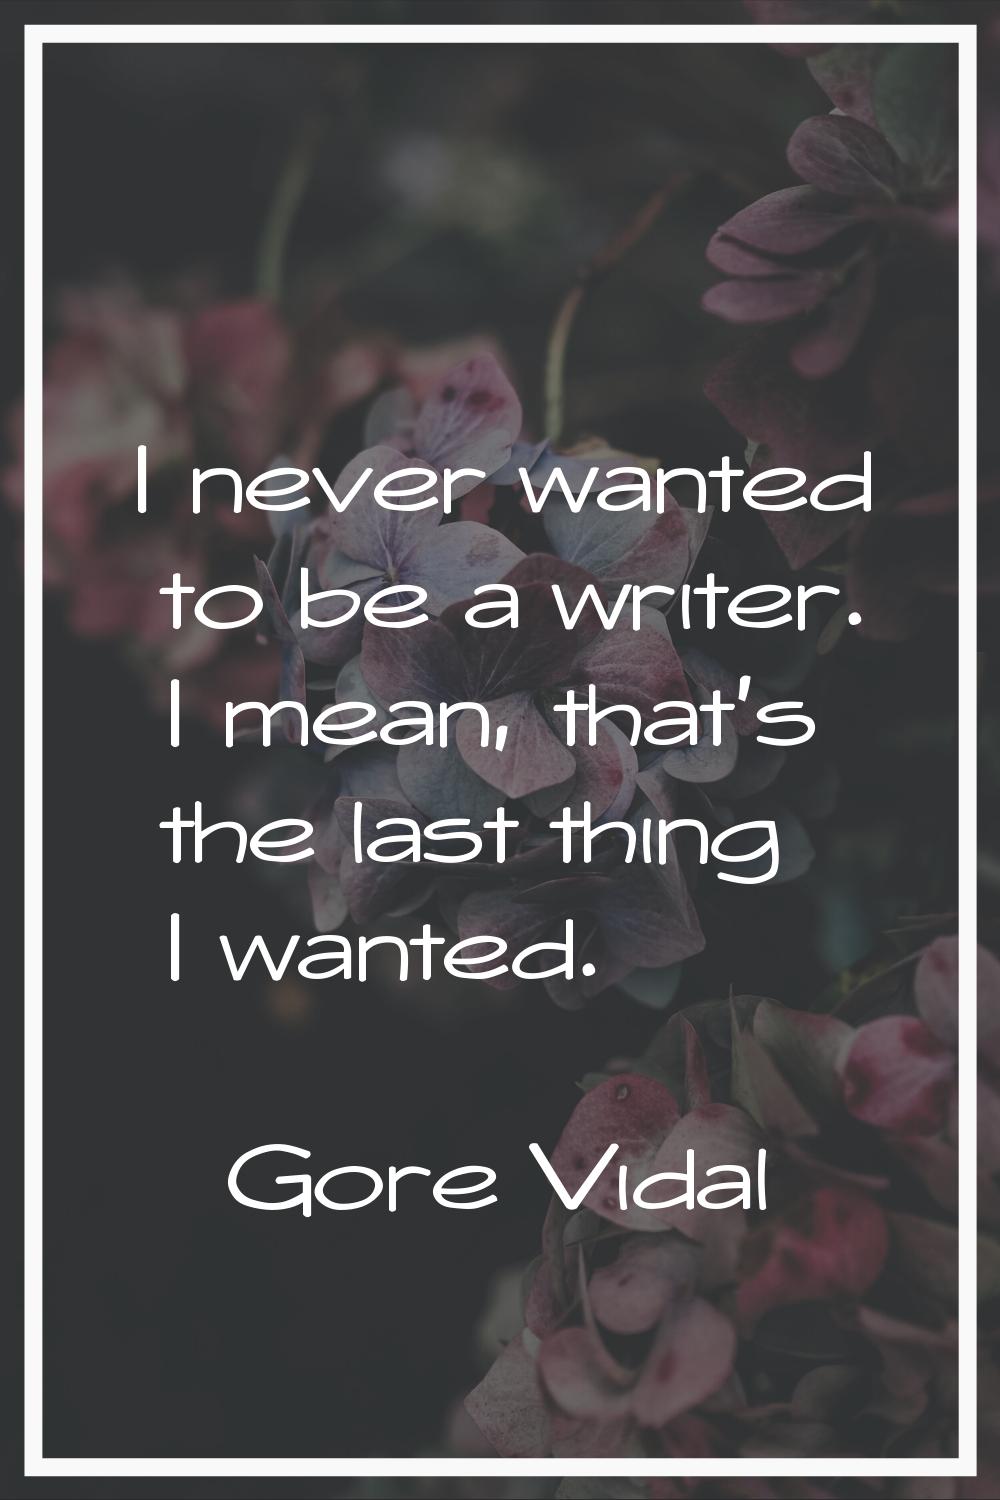 I never wanted to be a writer. I mean, that's the last thing I wanted.